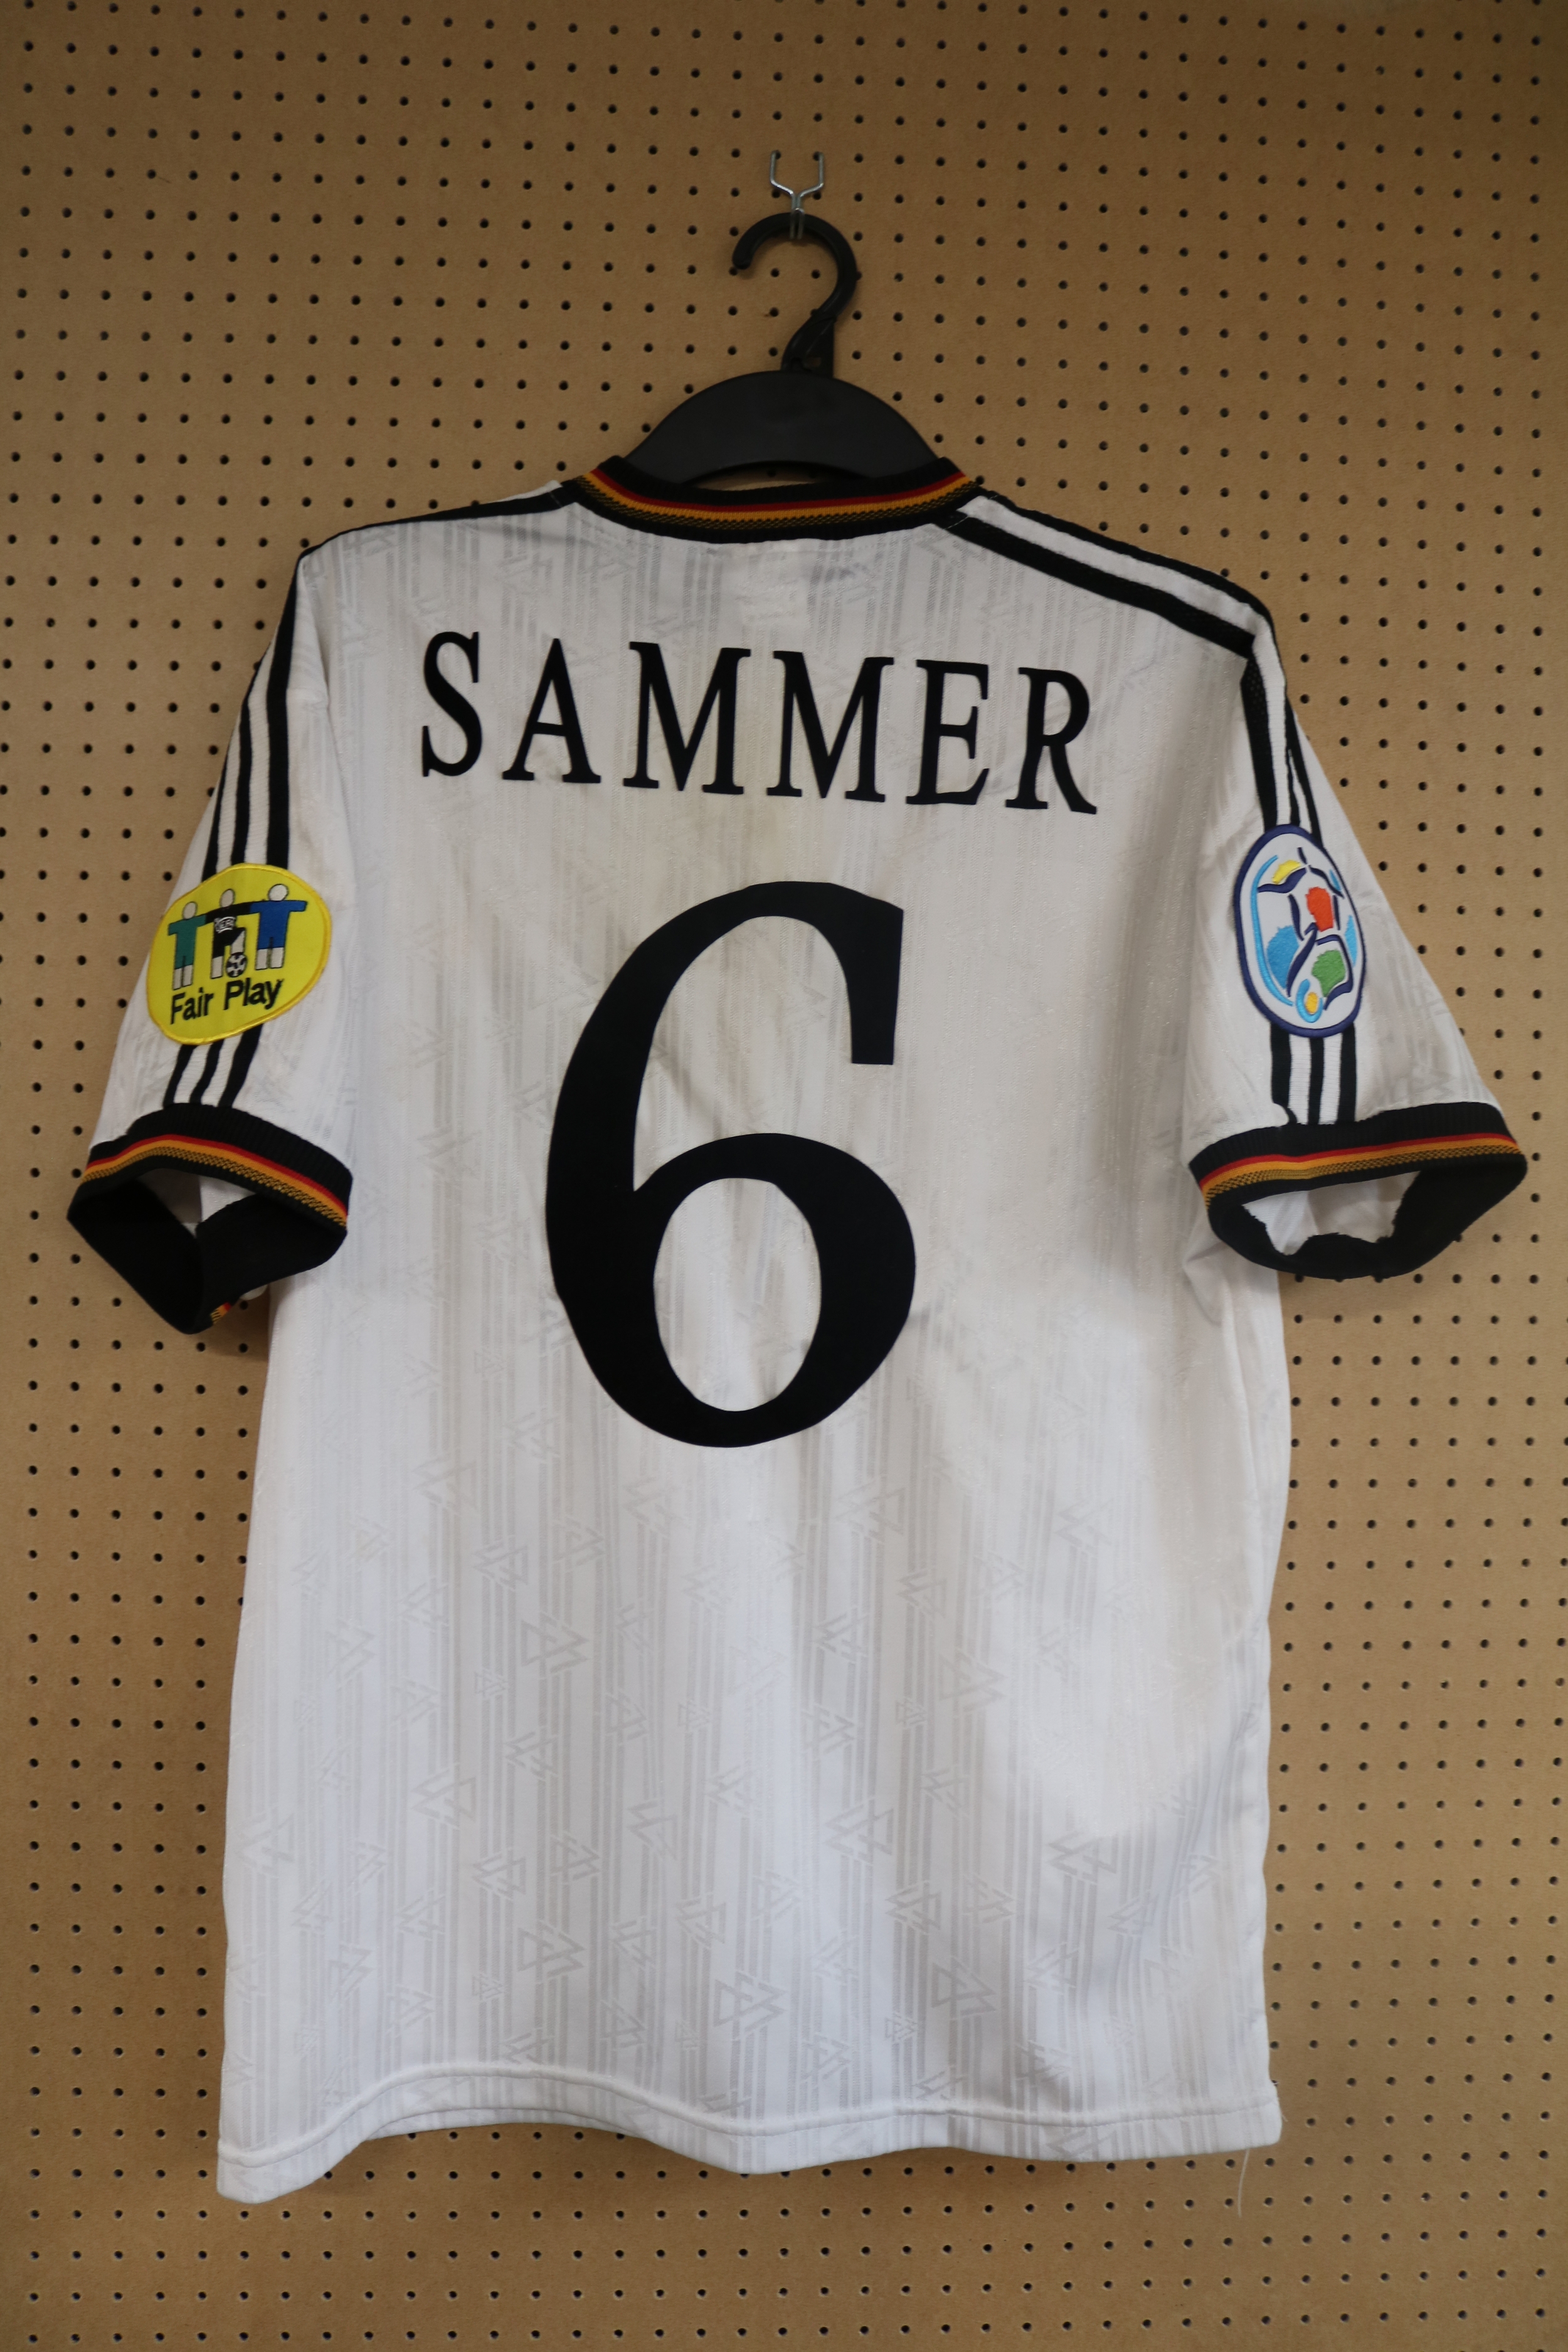 MATTHIAS SAMMER UEFA EURO 1996 MATCH WORN GERMANY JERSEY An Adidas white #6 jersey which was worn by - Image 5 of 5